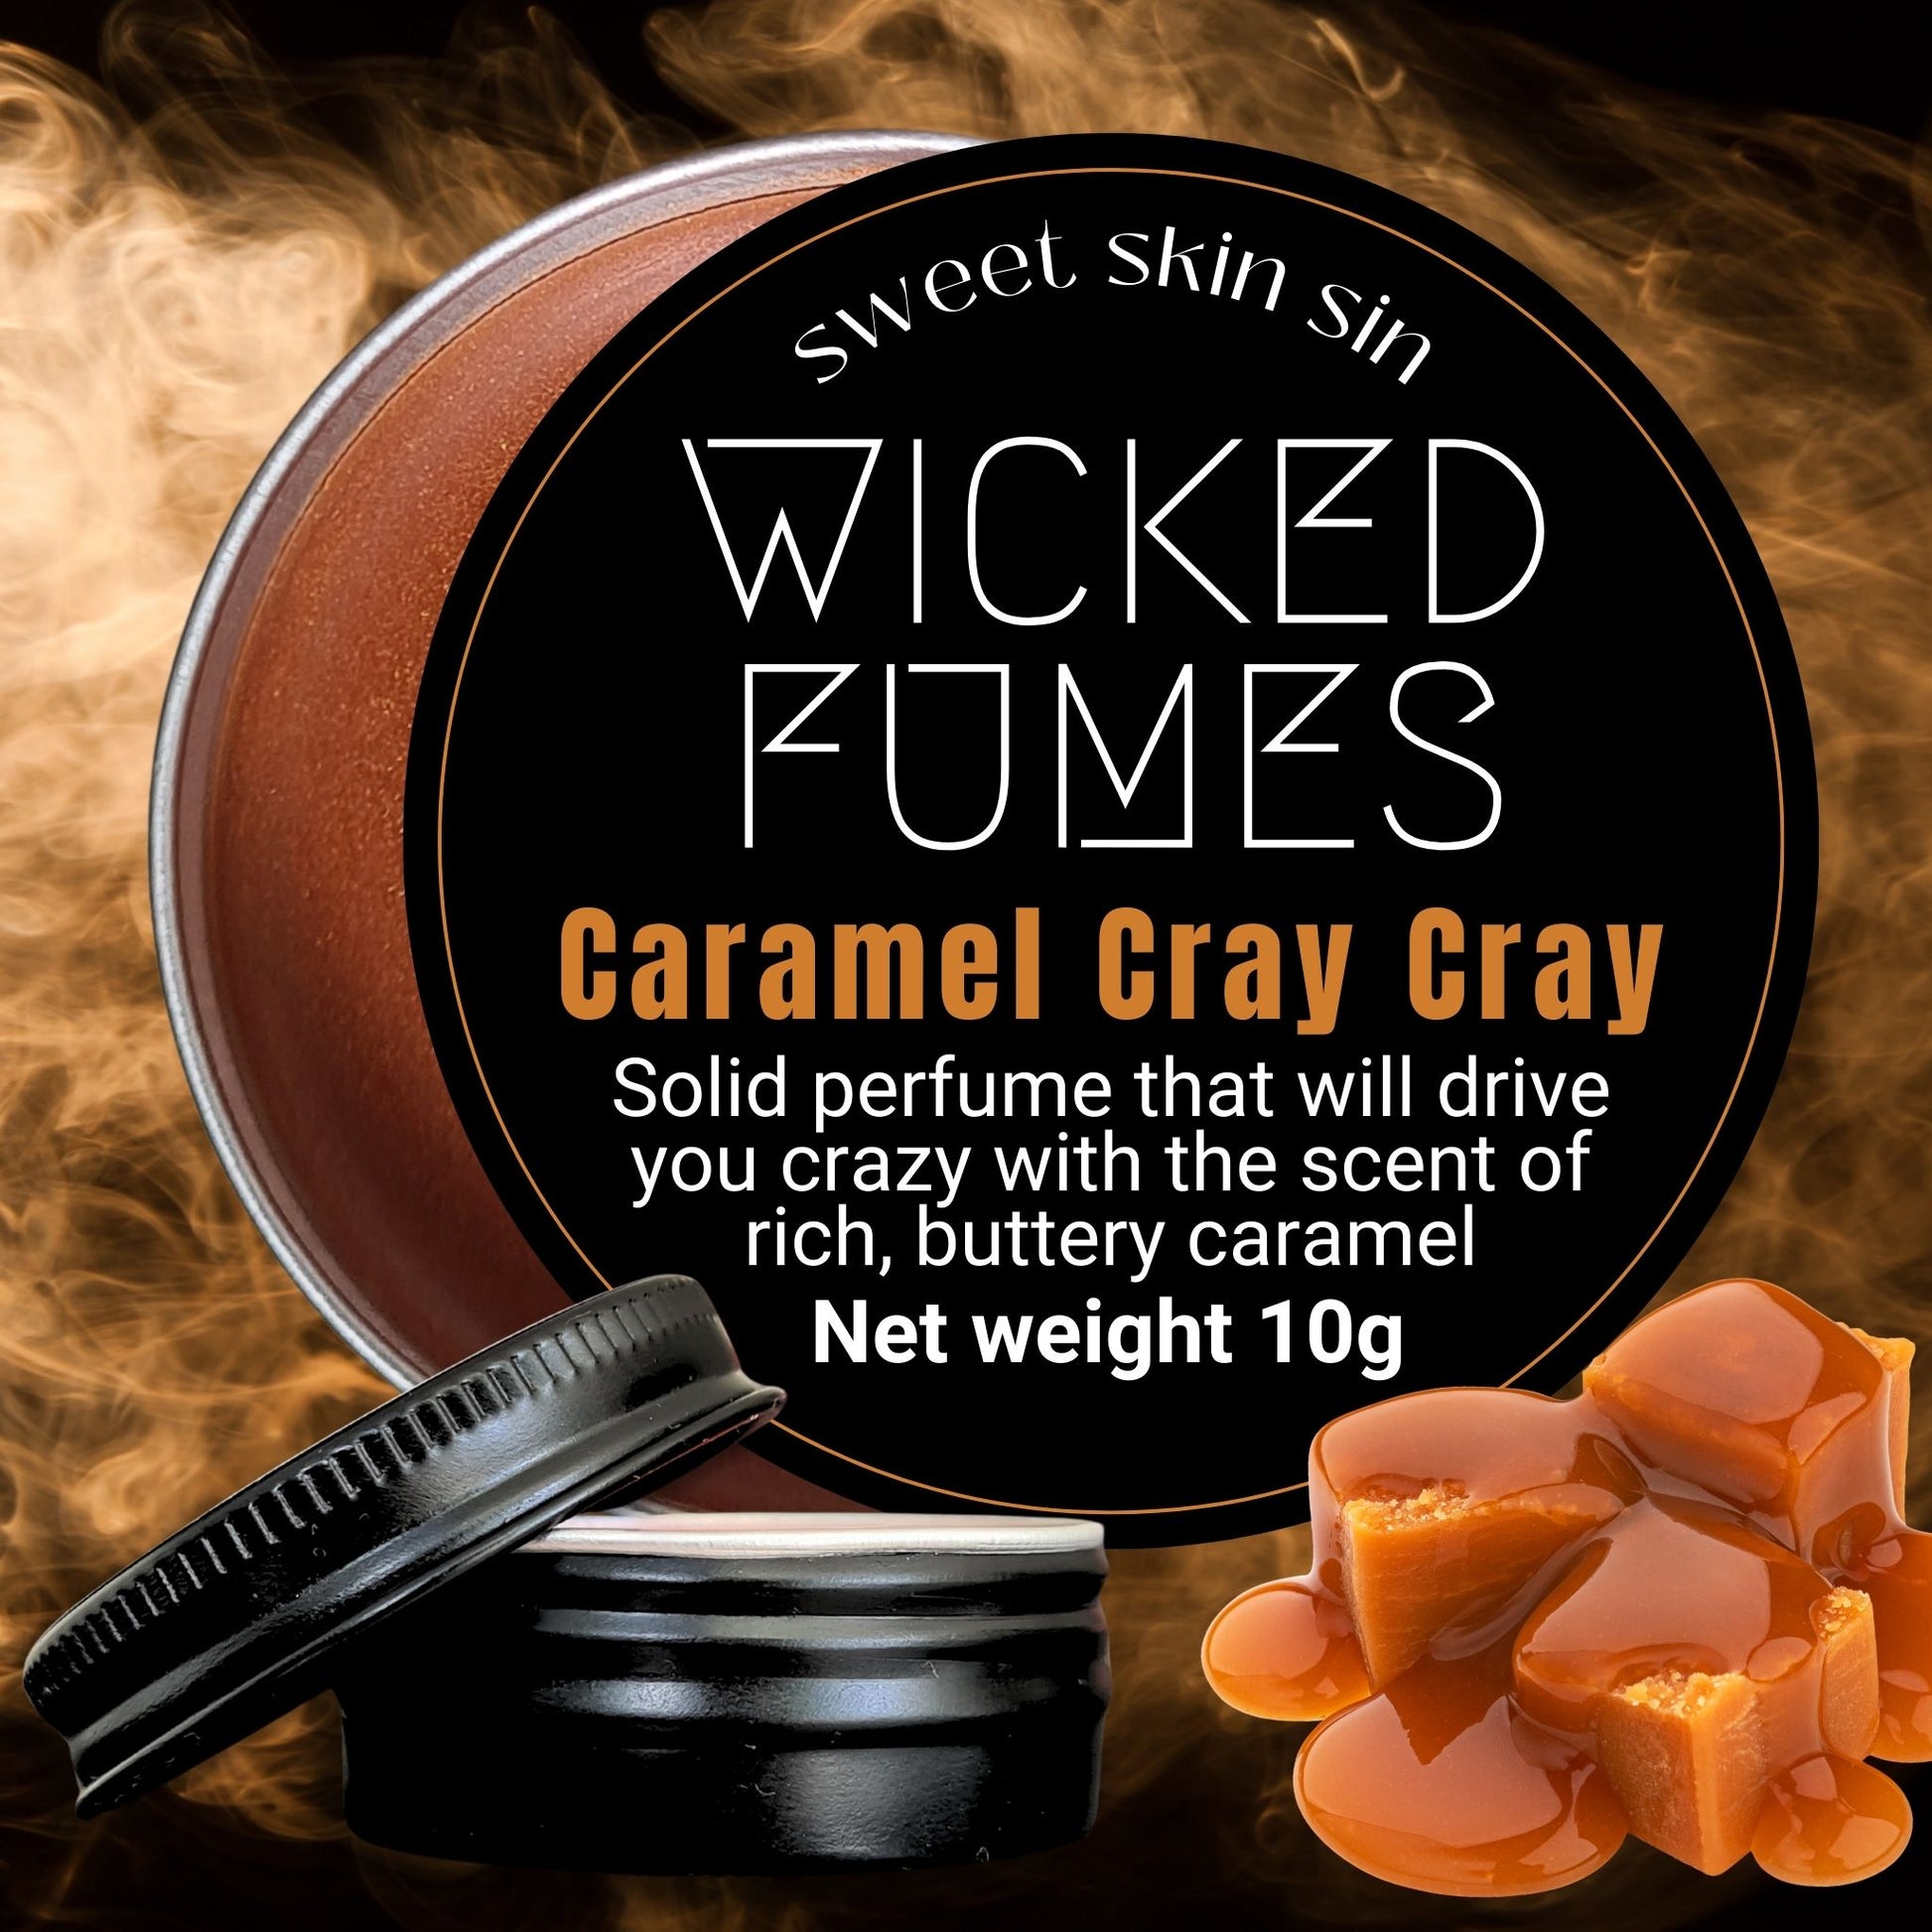 An image of Caramel Cray Cray a solid perfume from Wicked Fumes. The product is in a small black round jar. There are pieces of caramel in the image and in the background are caramel coloured fumes